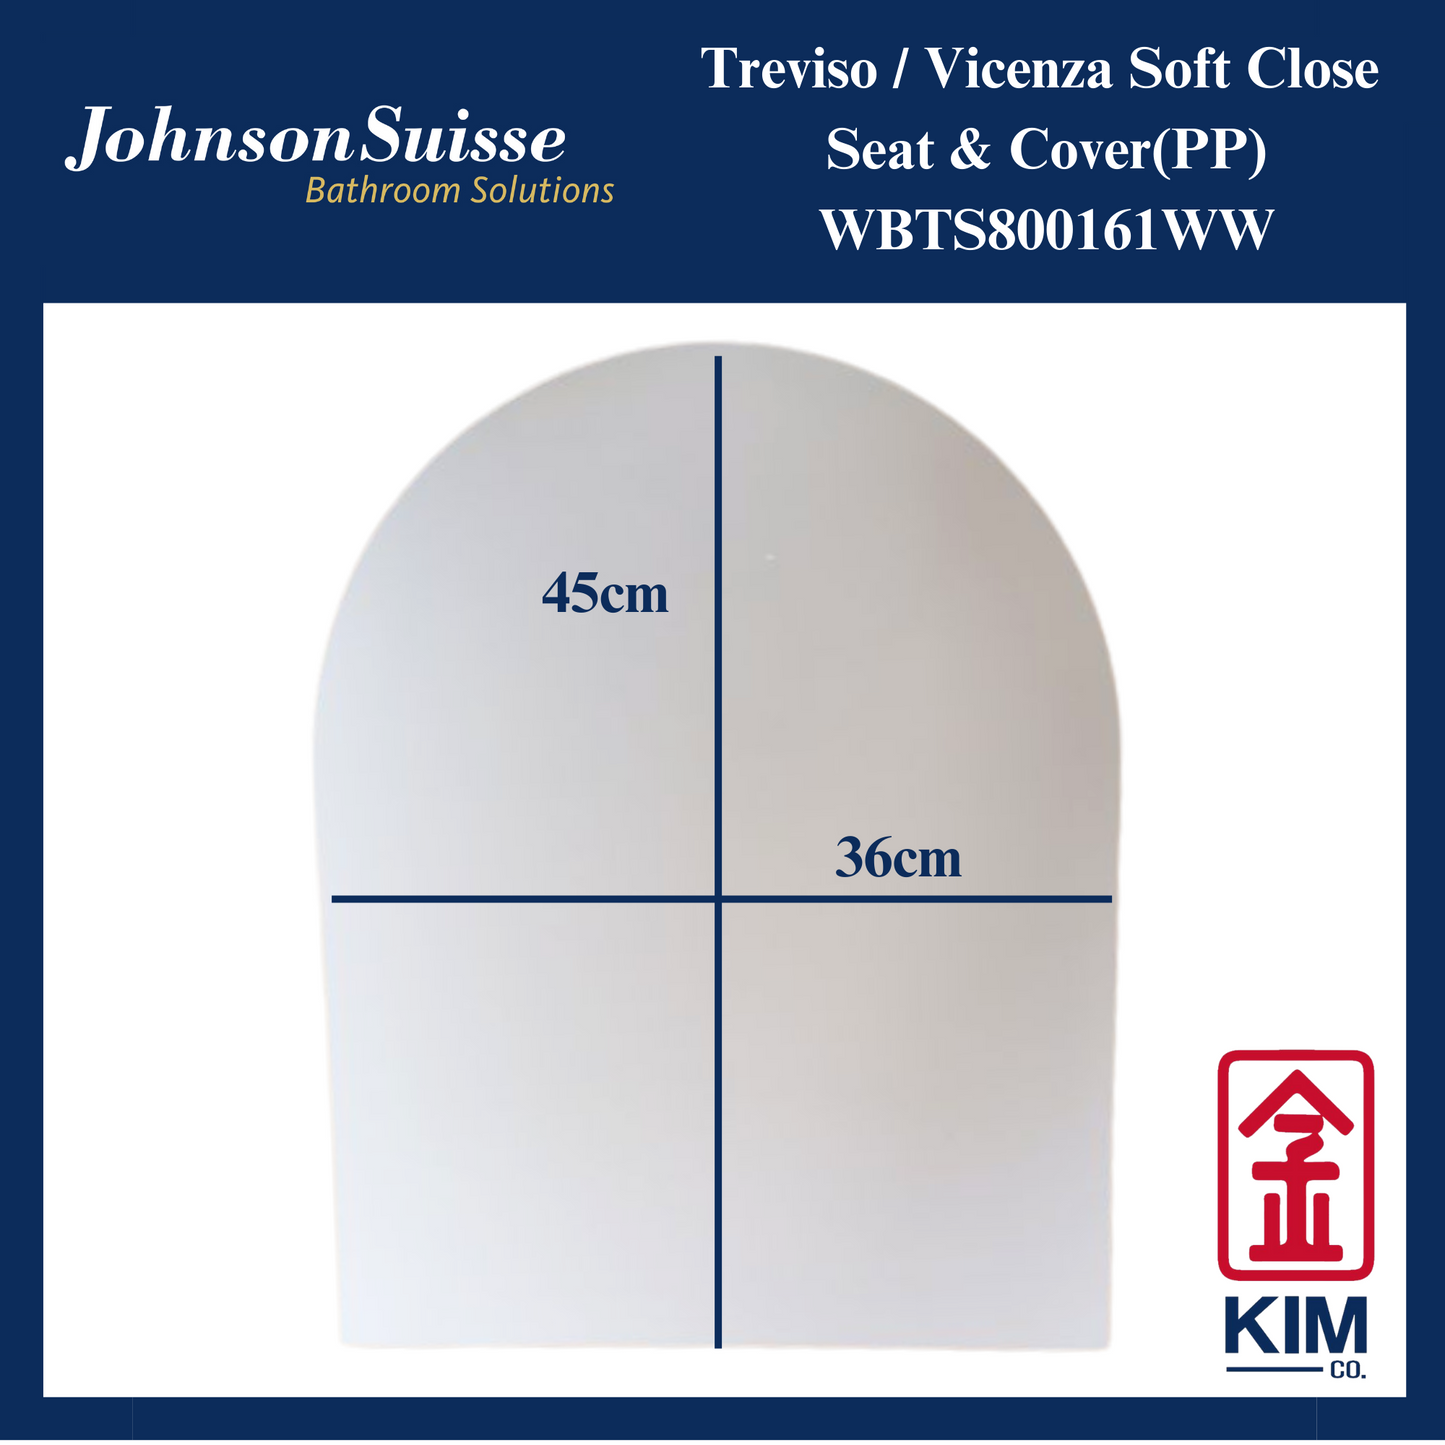 Johnson Suisse Treviso / Vicenza Soft Close Seat & Cover (UF)(WBTS800173WW)